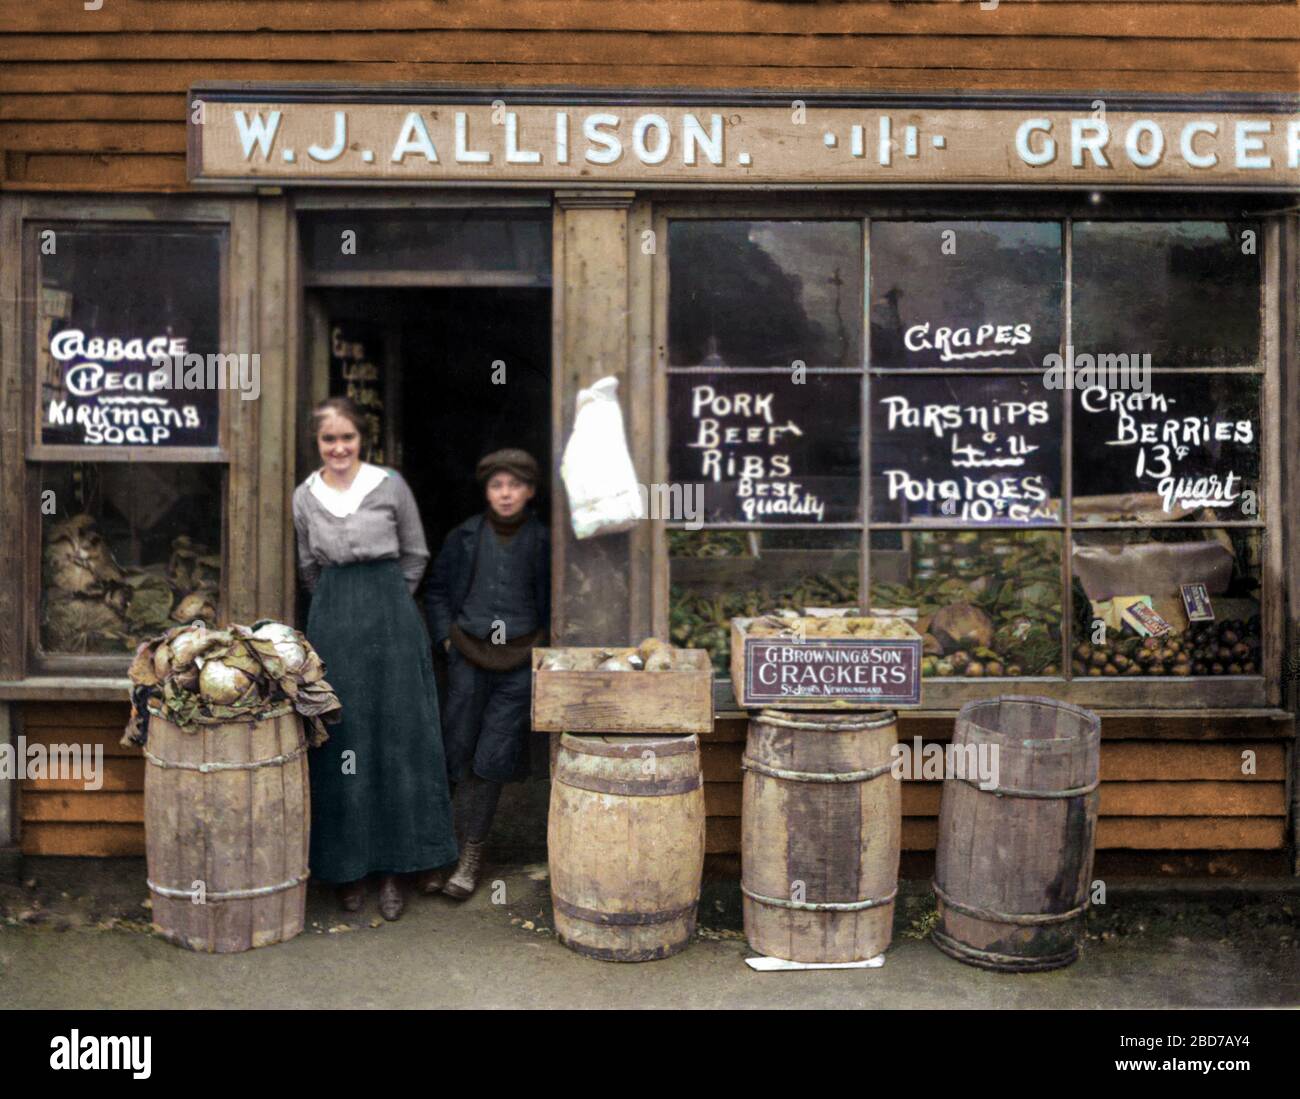 Clerk and delivery boy standing in doorway of W.J. Allison grocery store in St. John's Newfoundland circa 1915. Fruit and vegetables on display. Stock Photo